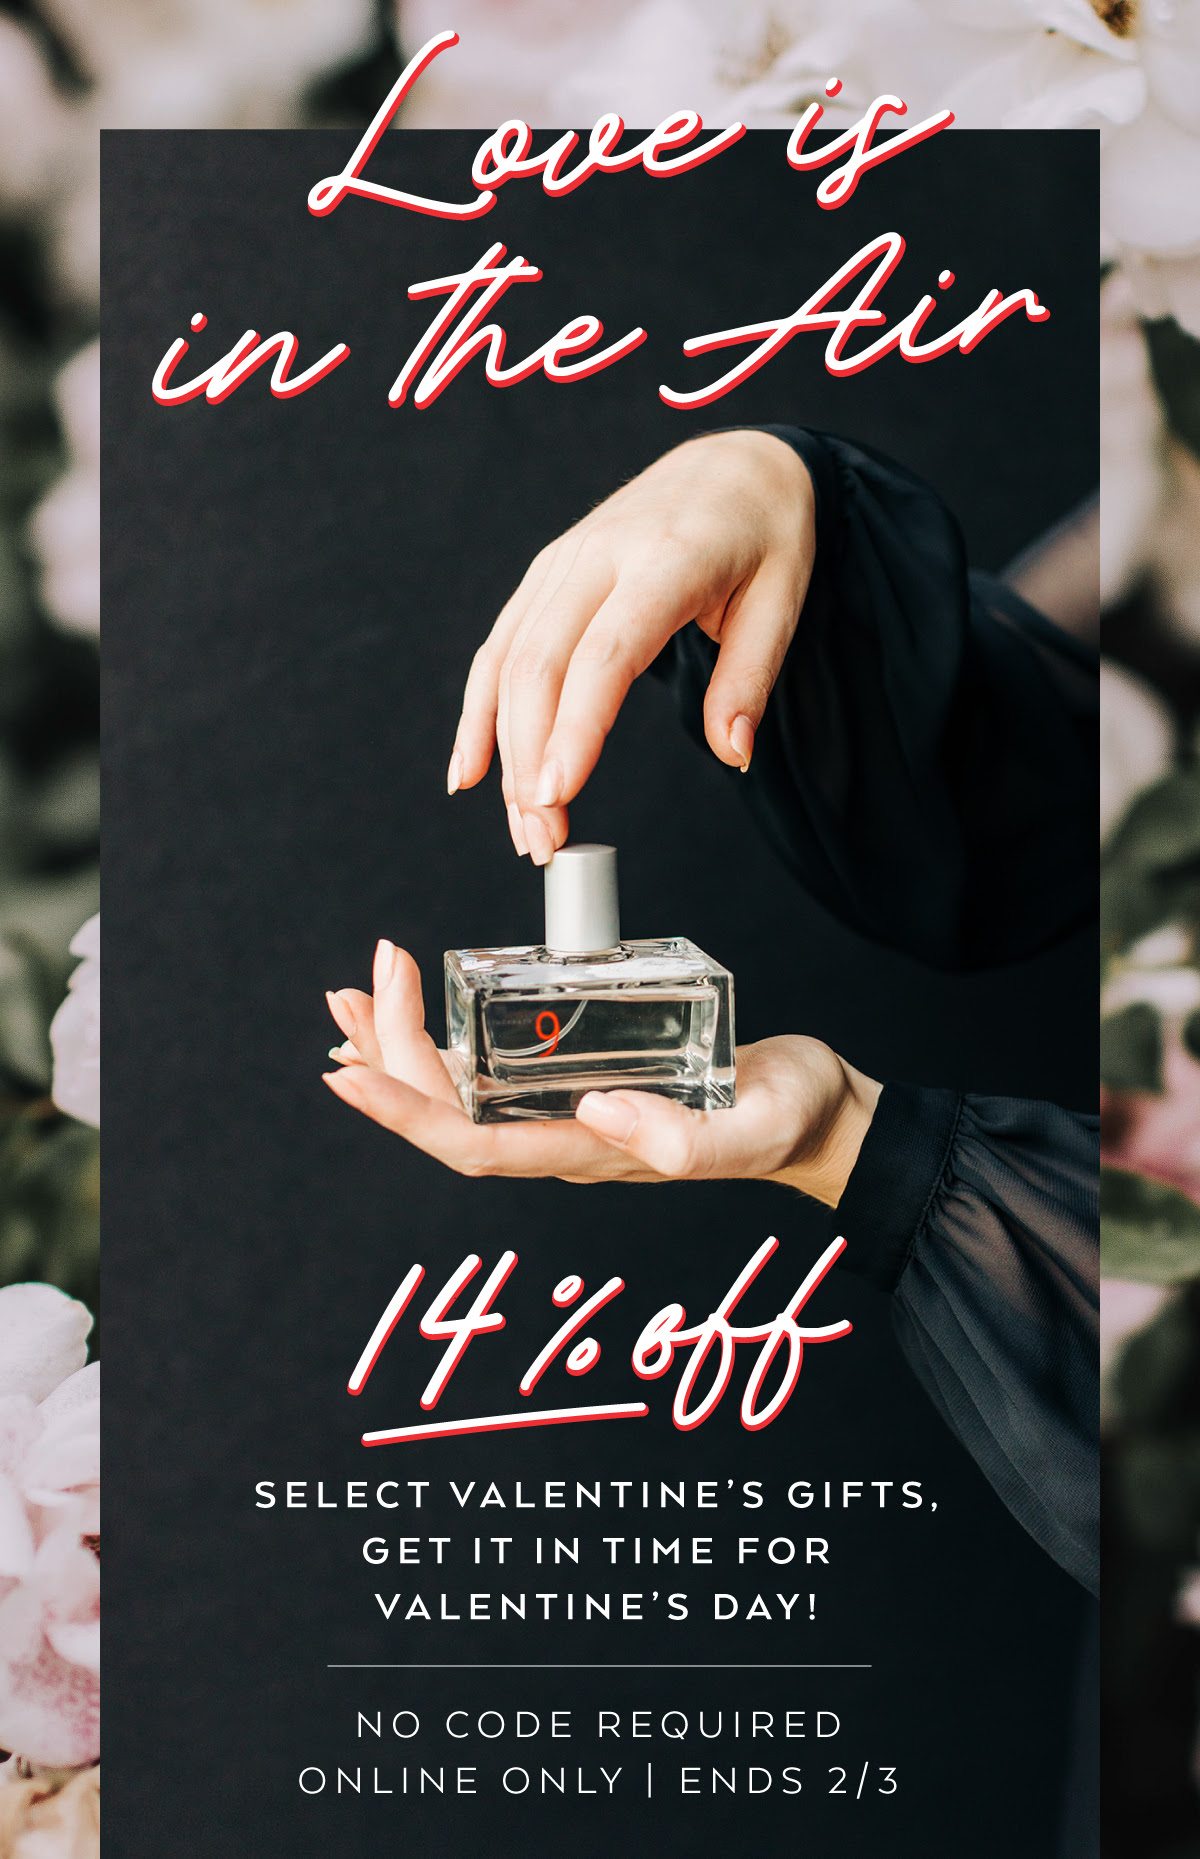 Margot Elena Sale – 14% OFF Select Valentine’s Day Gifts + Free Gift!